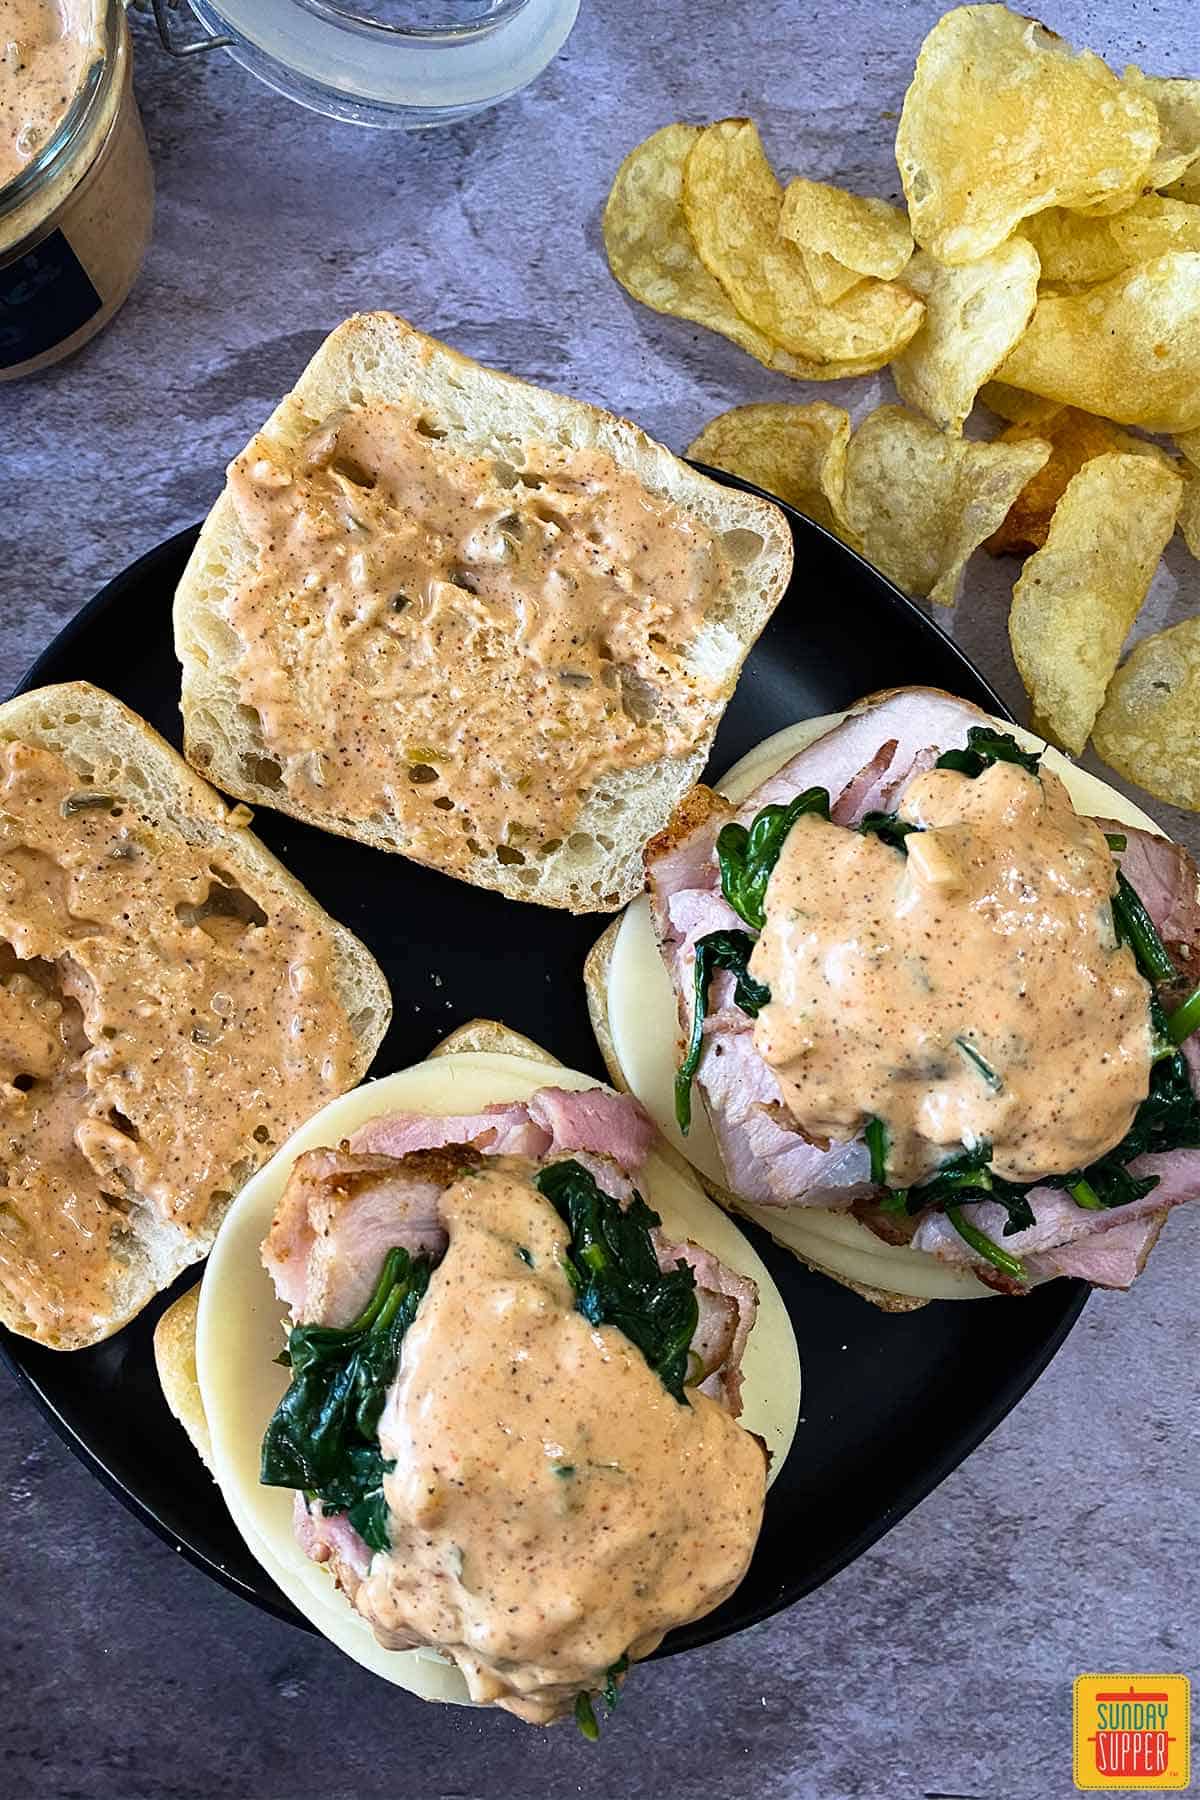 Two pork sandwiches topped with remoulade